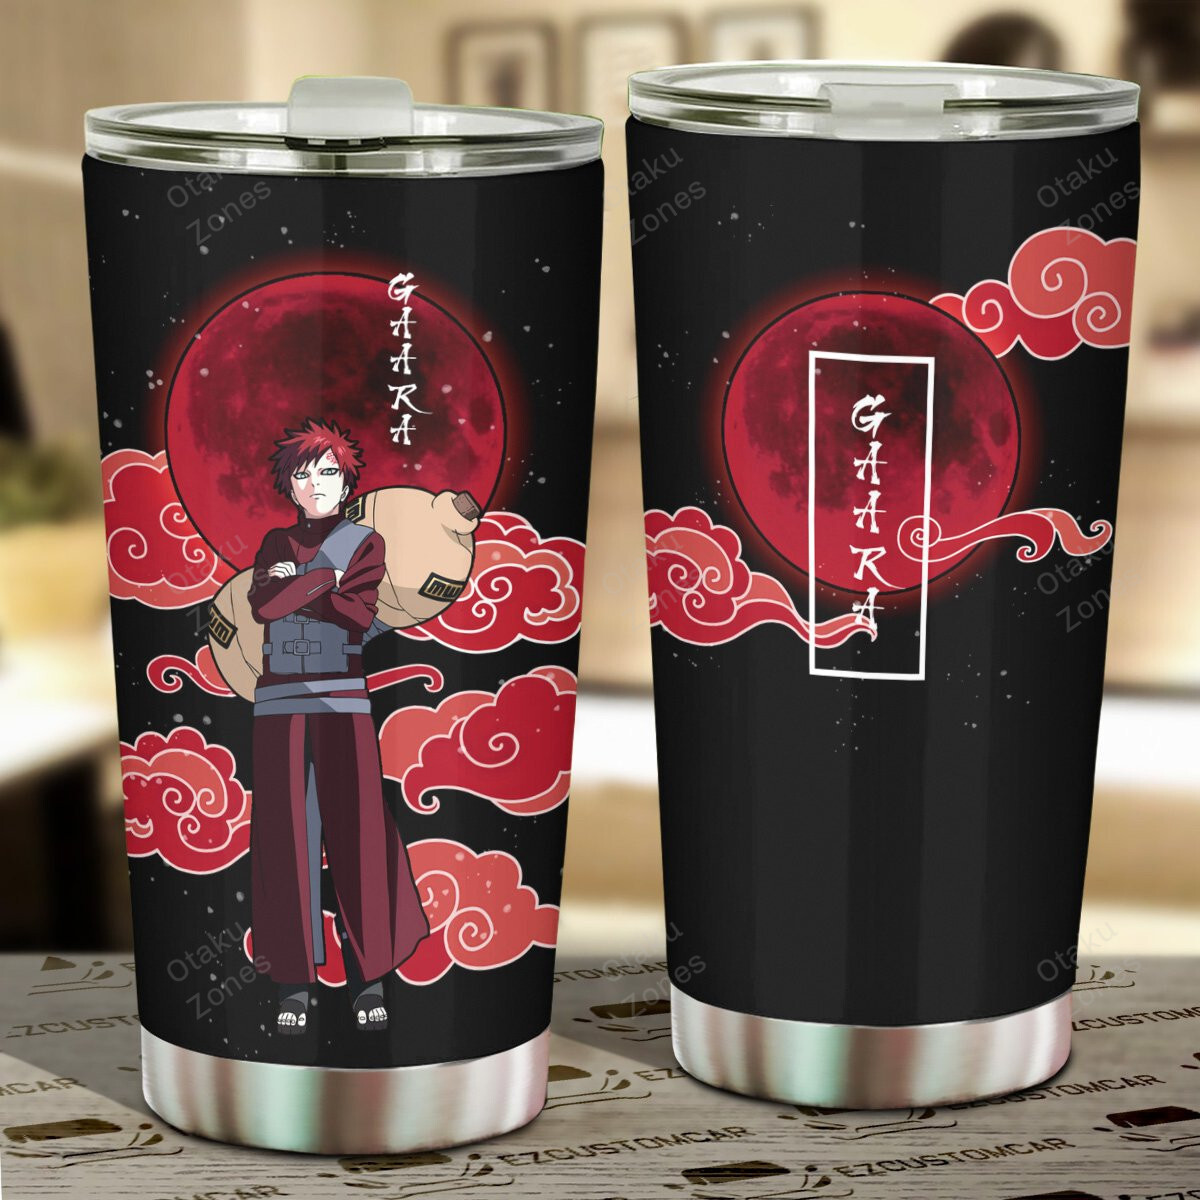 Go ahead and order your new tumbler now! 19